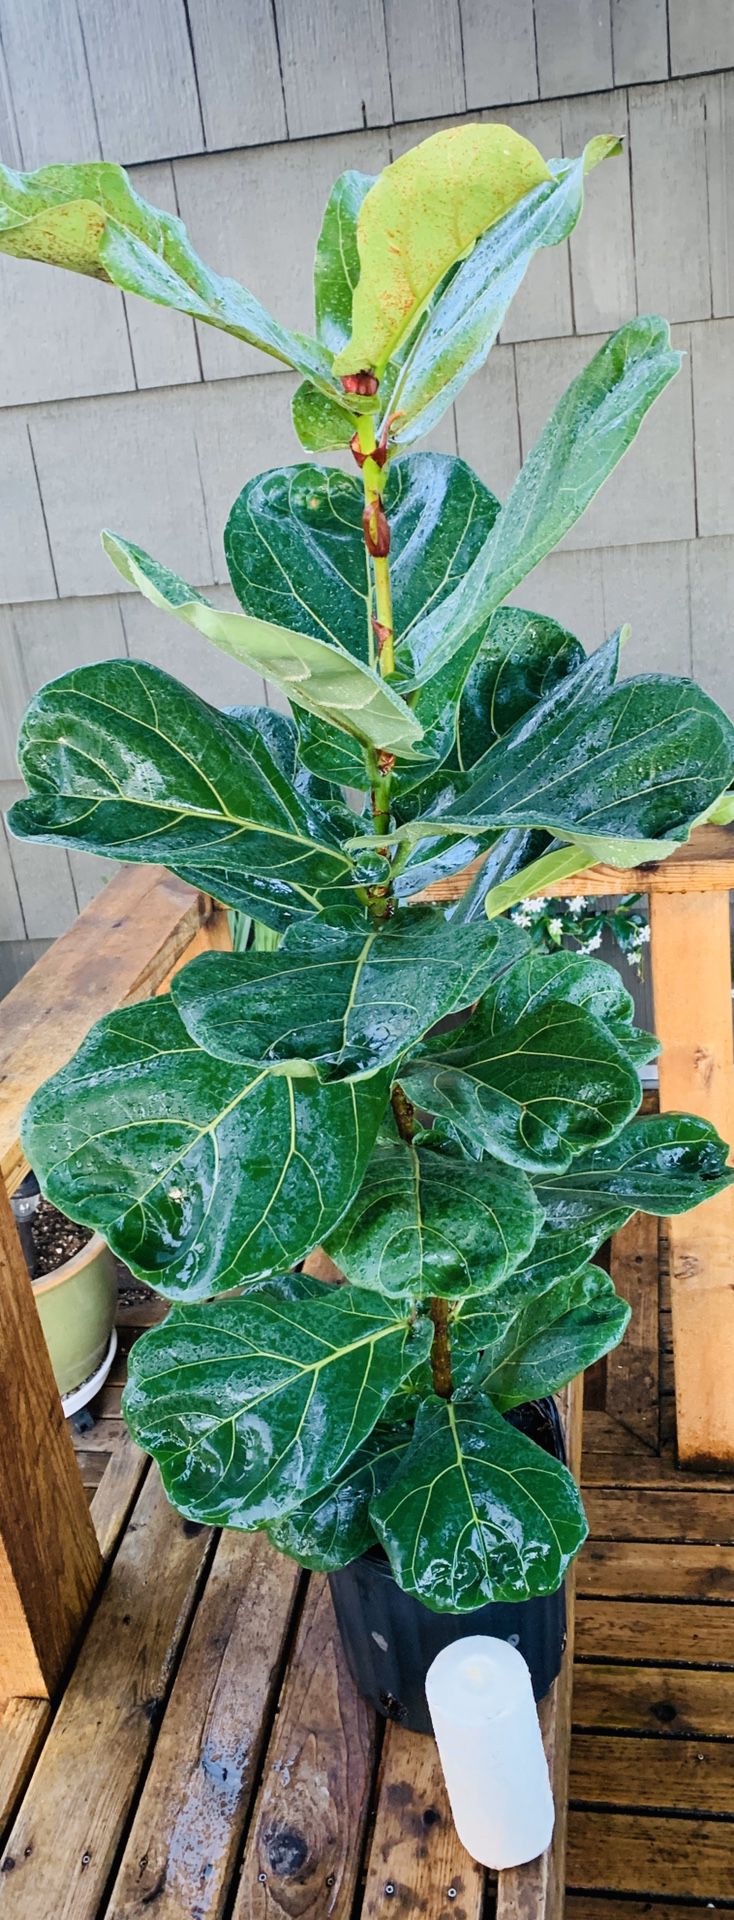 (On hold) live Fiddle Leaf Fig tree plant in a plastic nursery pot—firm price